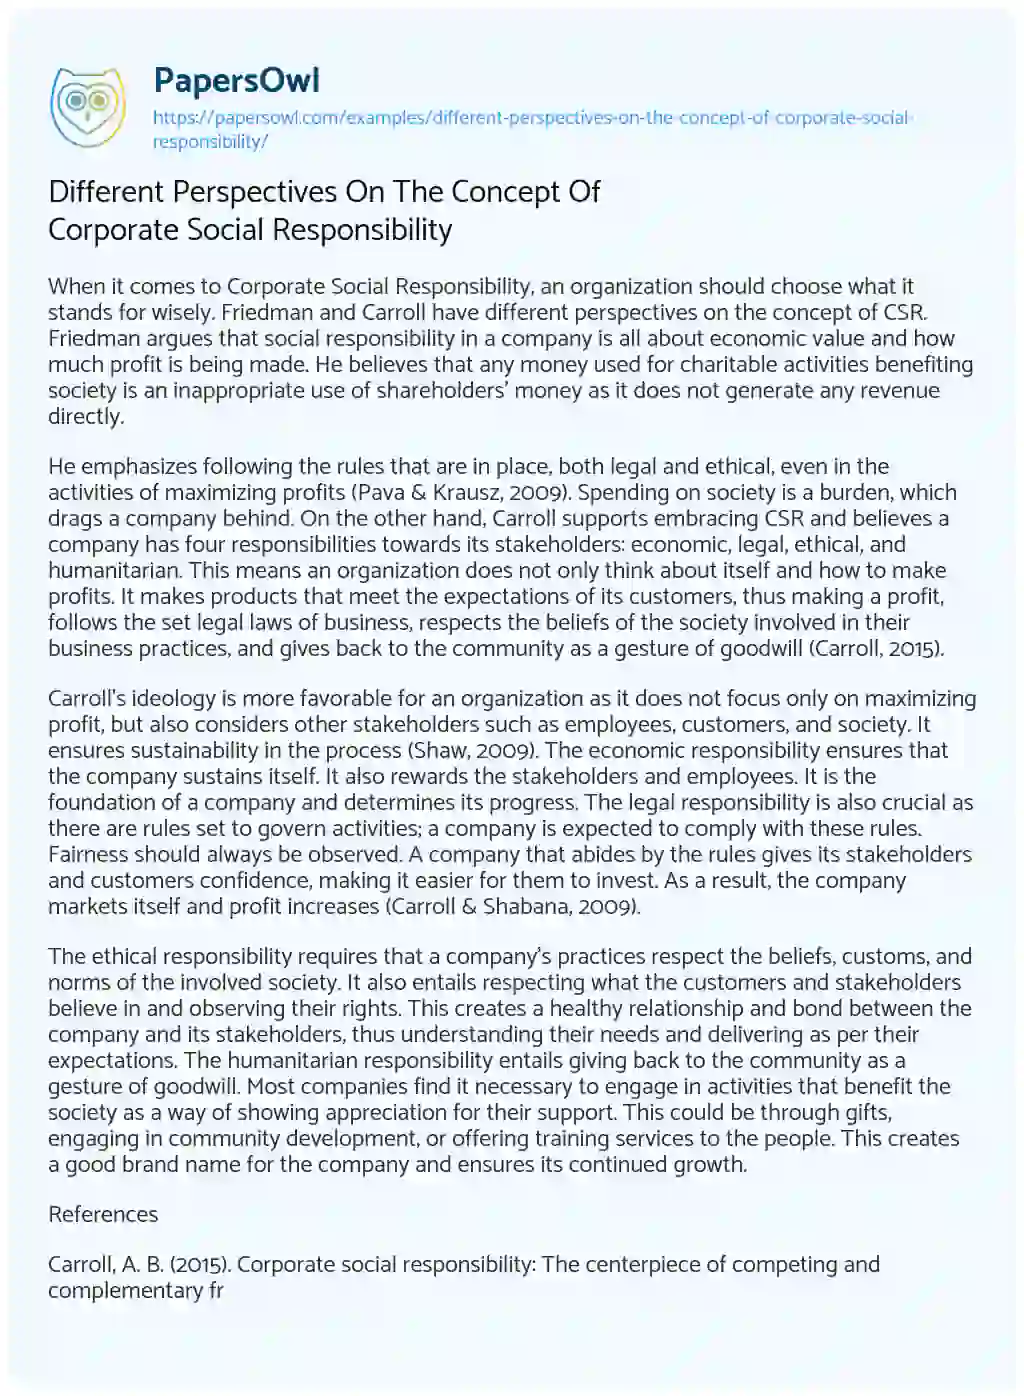 Essay on Different Perspectives on the Concept of Corporate Social Responsibility